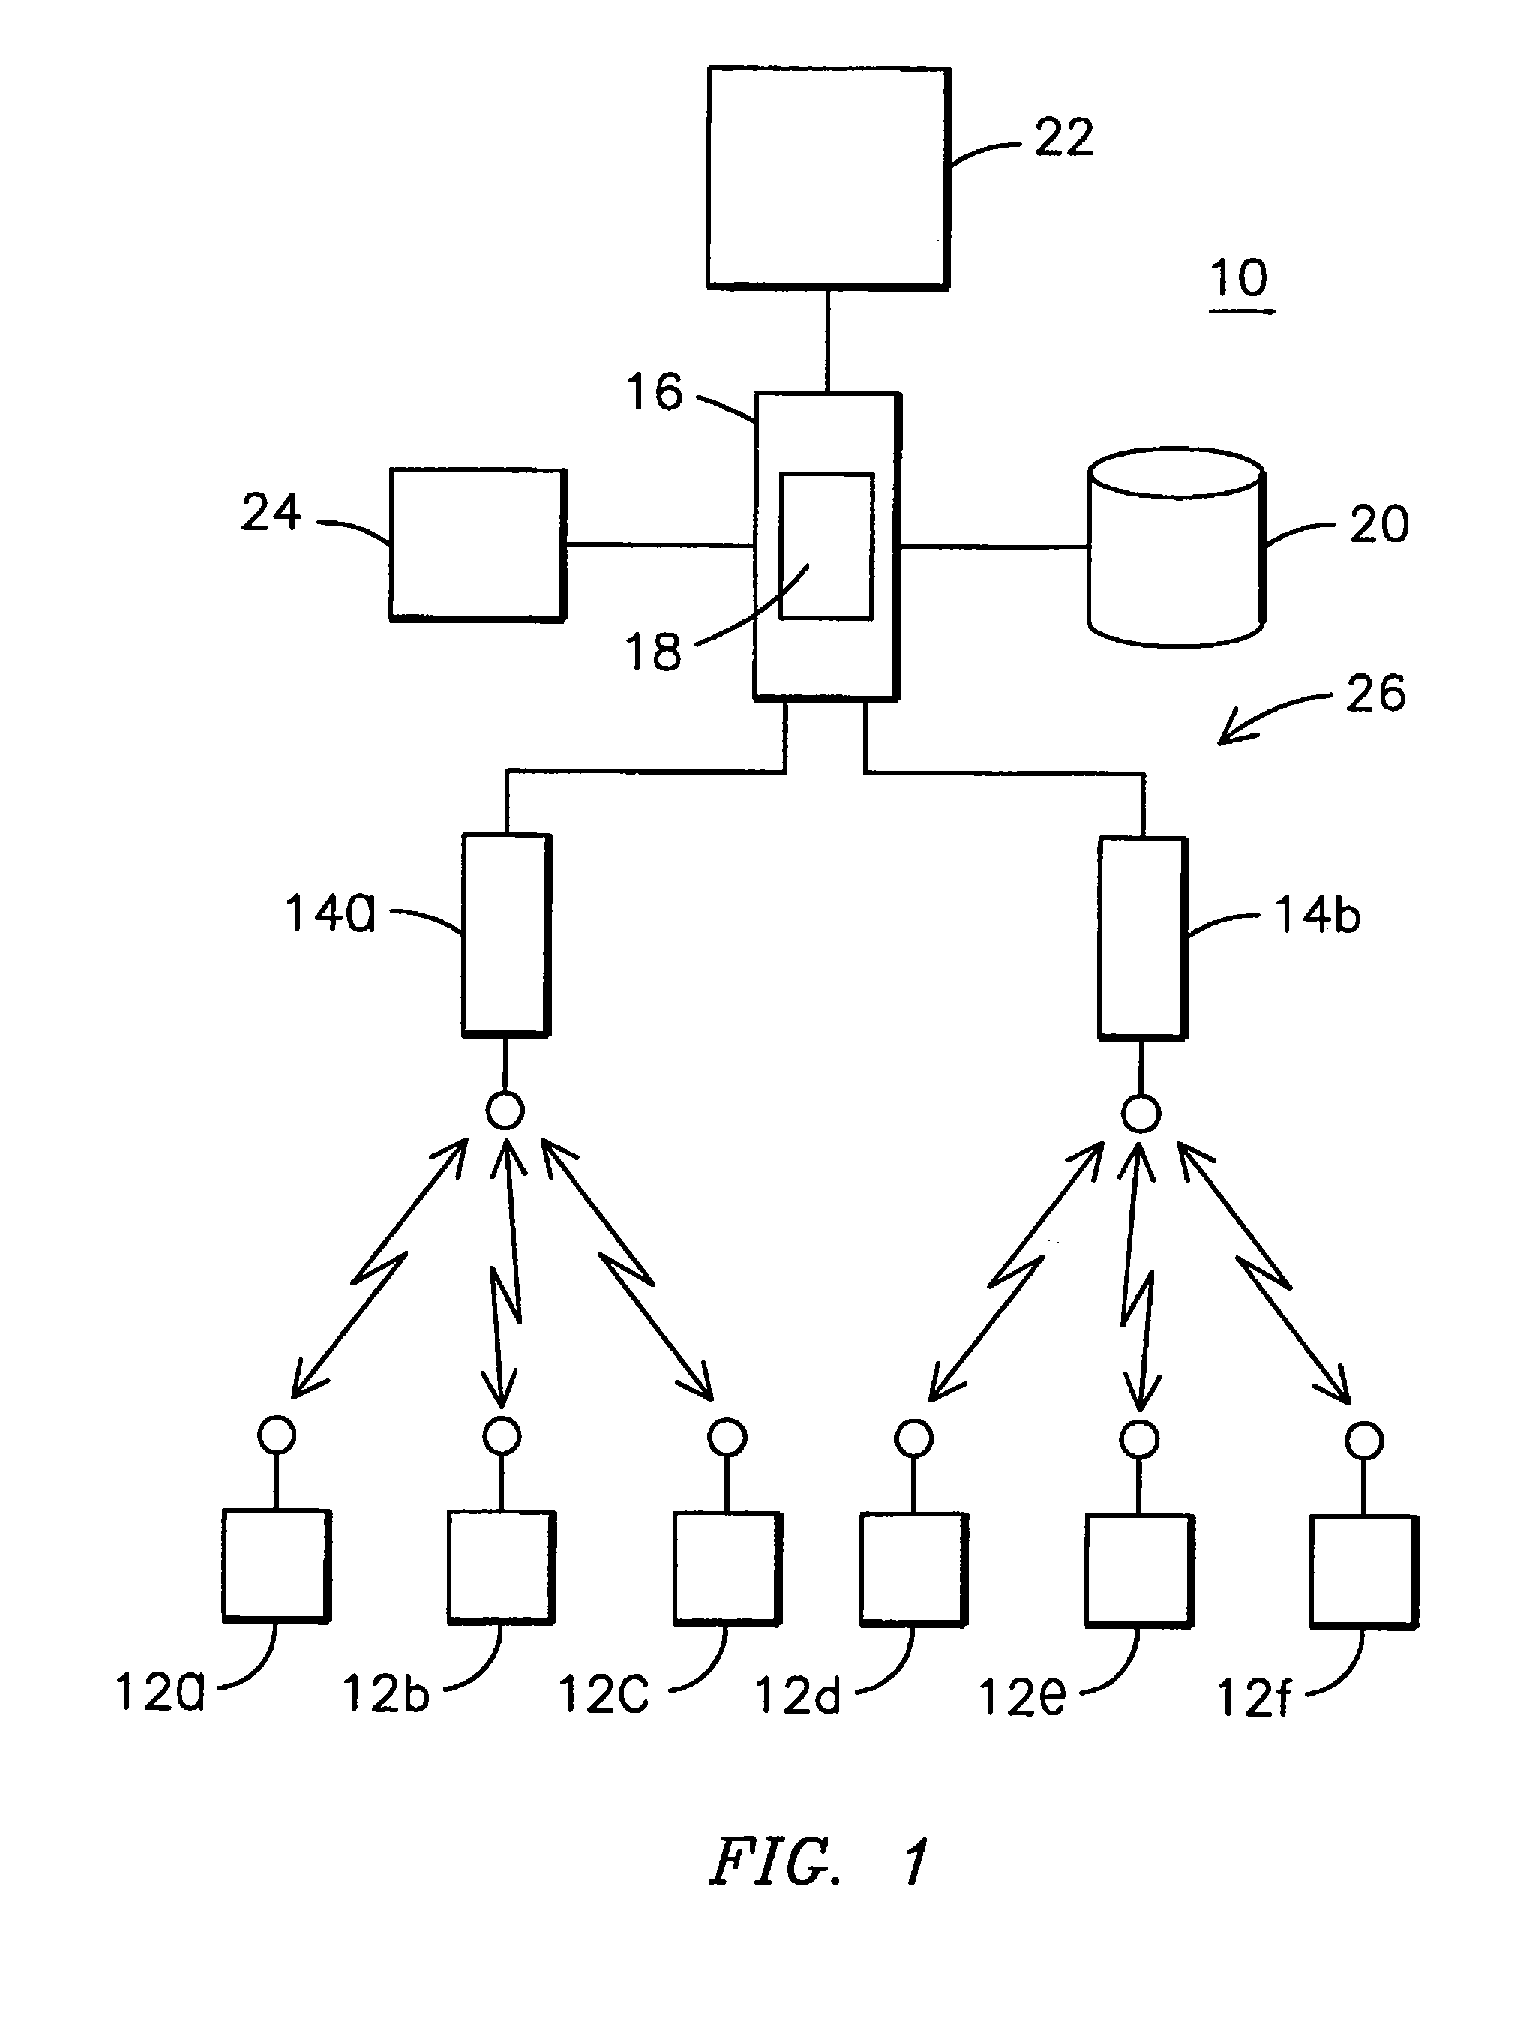 System and Method For Providing Centralized Physiological Monitoring